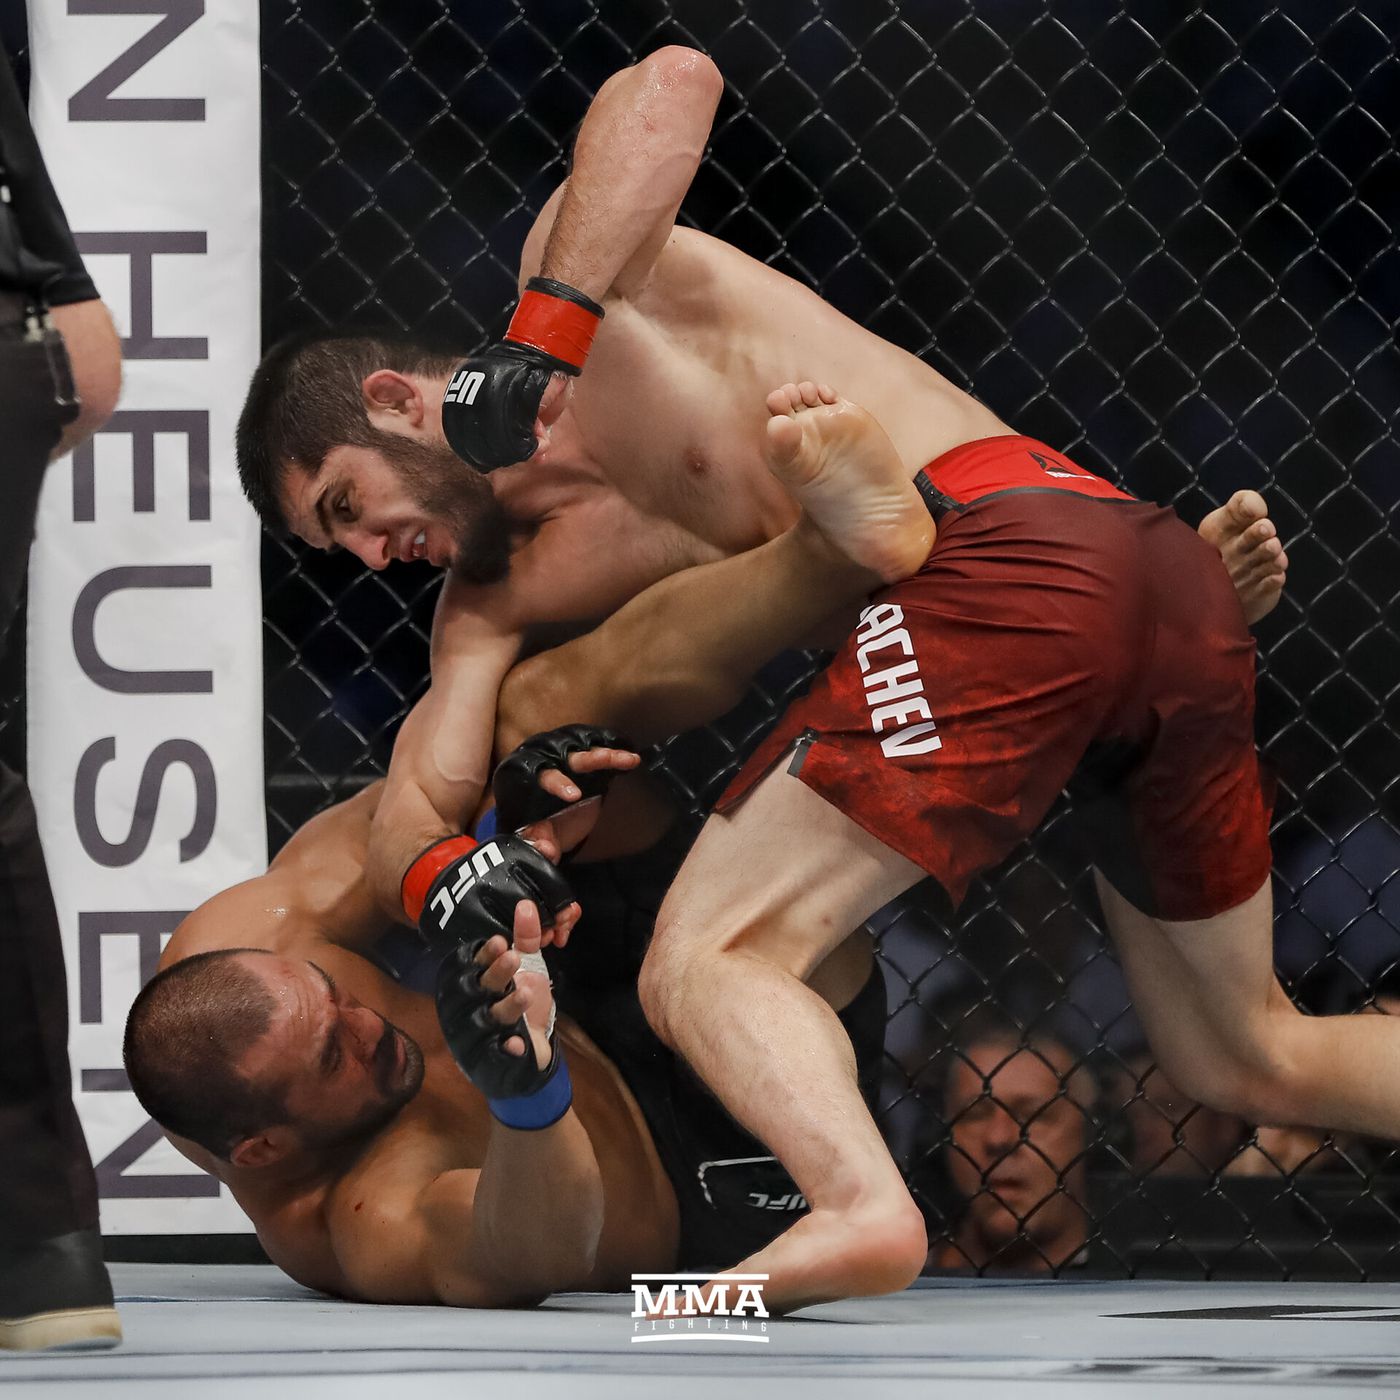 UFC 242 results: Islam Makhachev earns sixth straight win with dominant showing against Davi Ramos